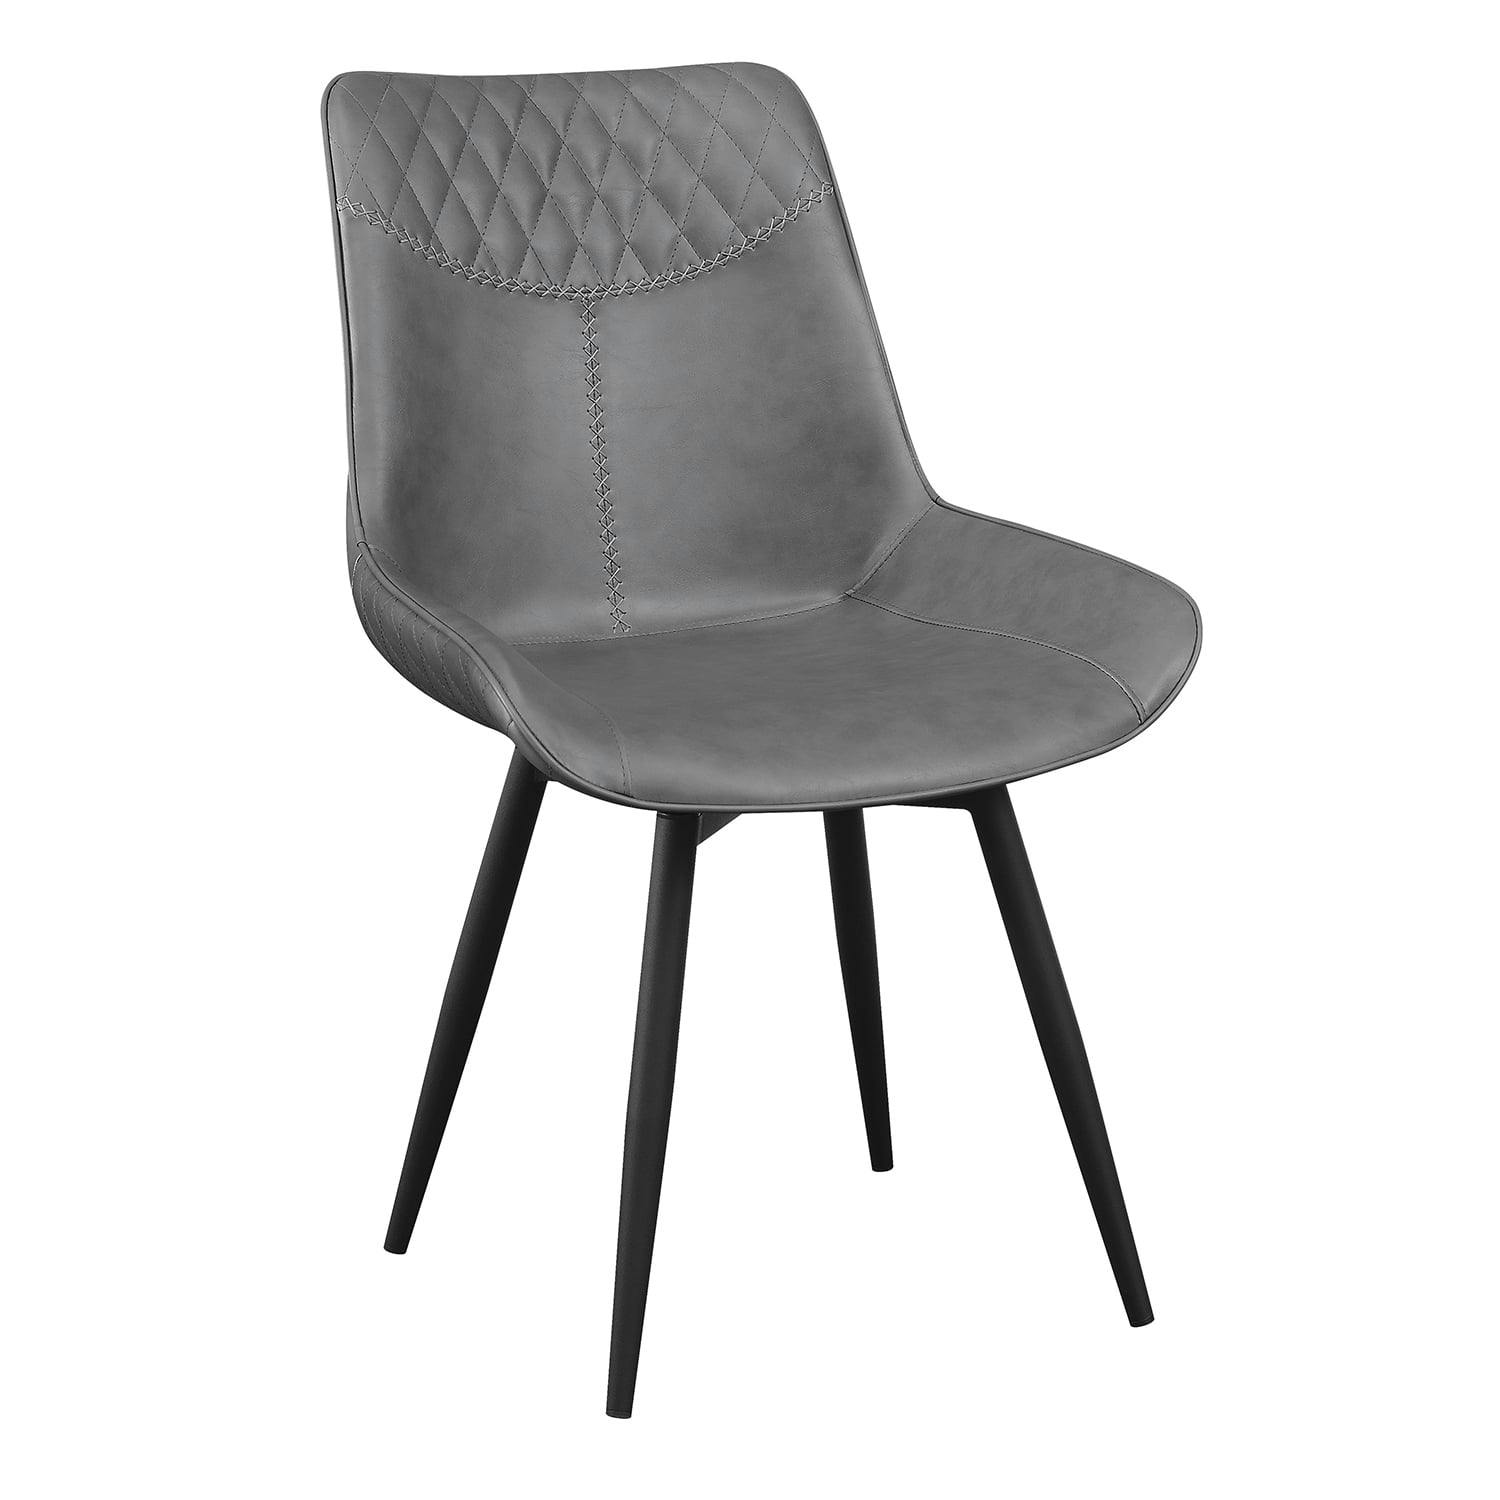 Transitional Gray Faux Leather Side Chair with Swivel Seat